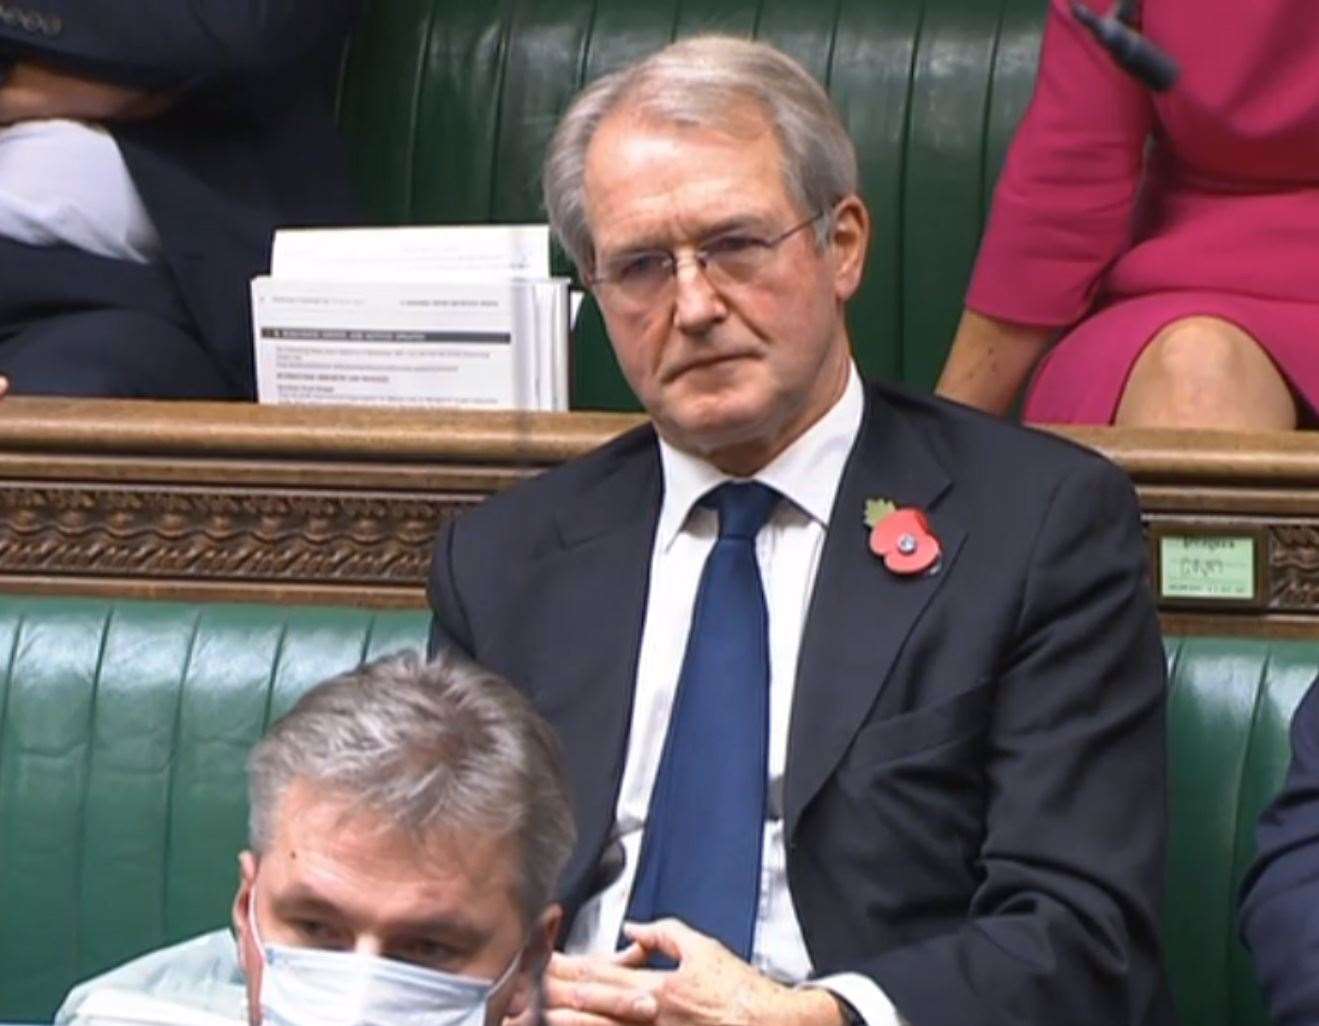 Owen Paterson resigned as the MP for North Shropshire (House of Commons/PA)